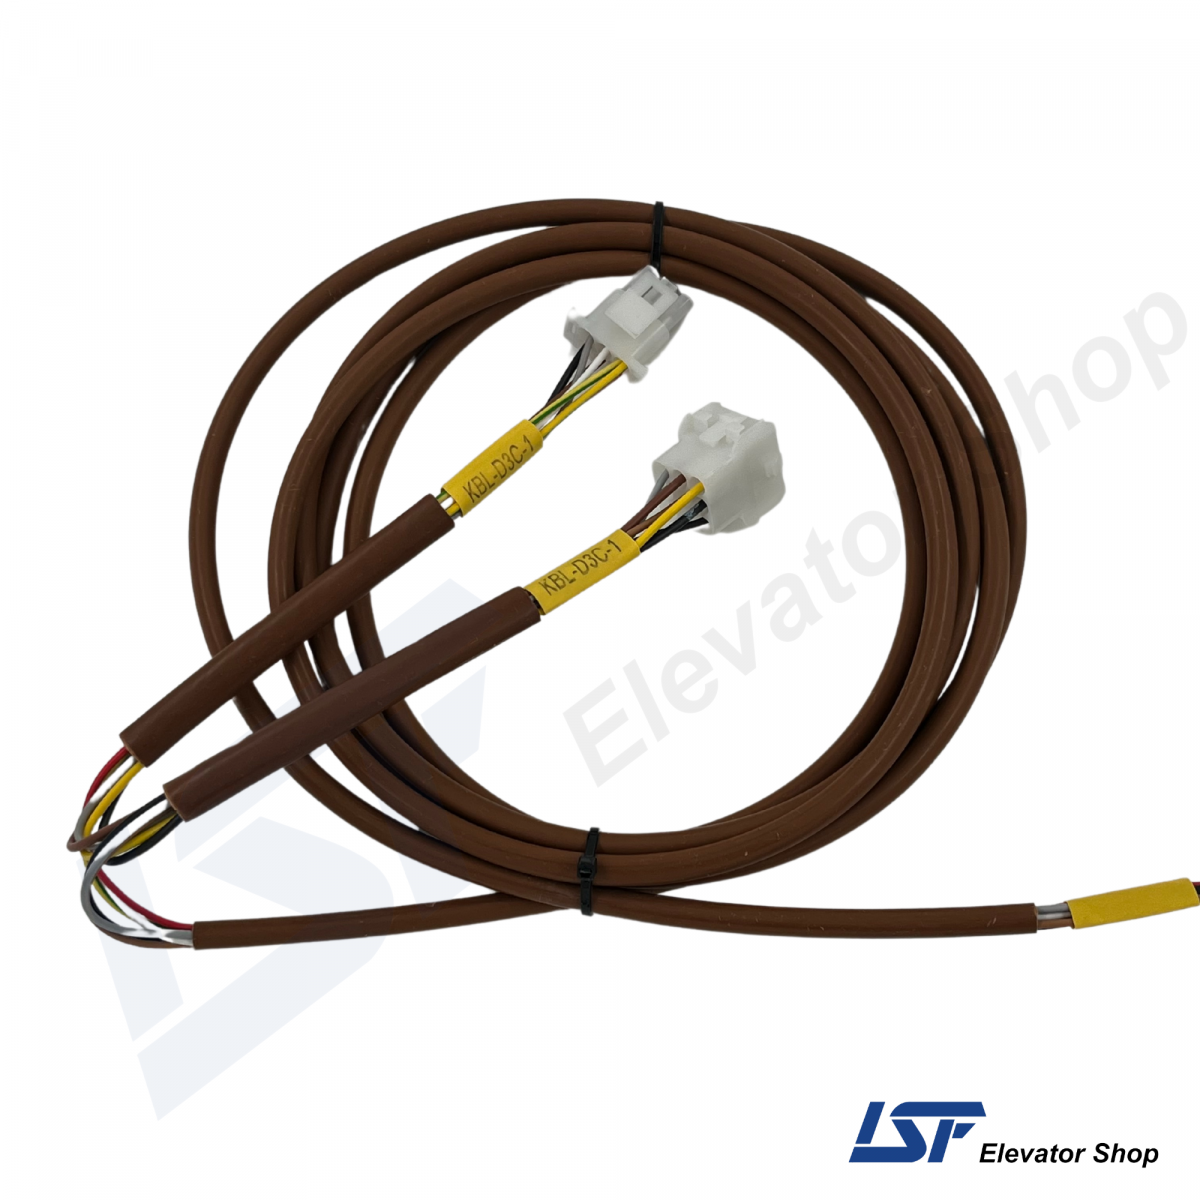 KBL-D3C-1 Arkel Door Contacts Cable 3,3m. for Elevator Systems